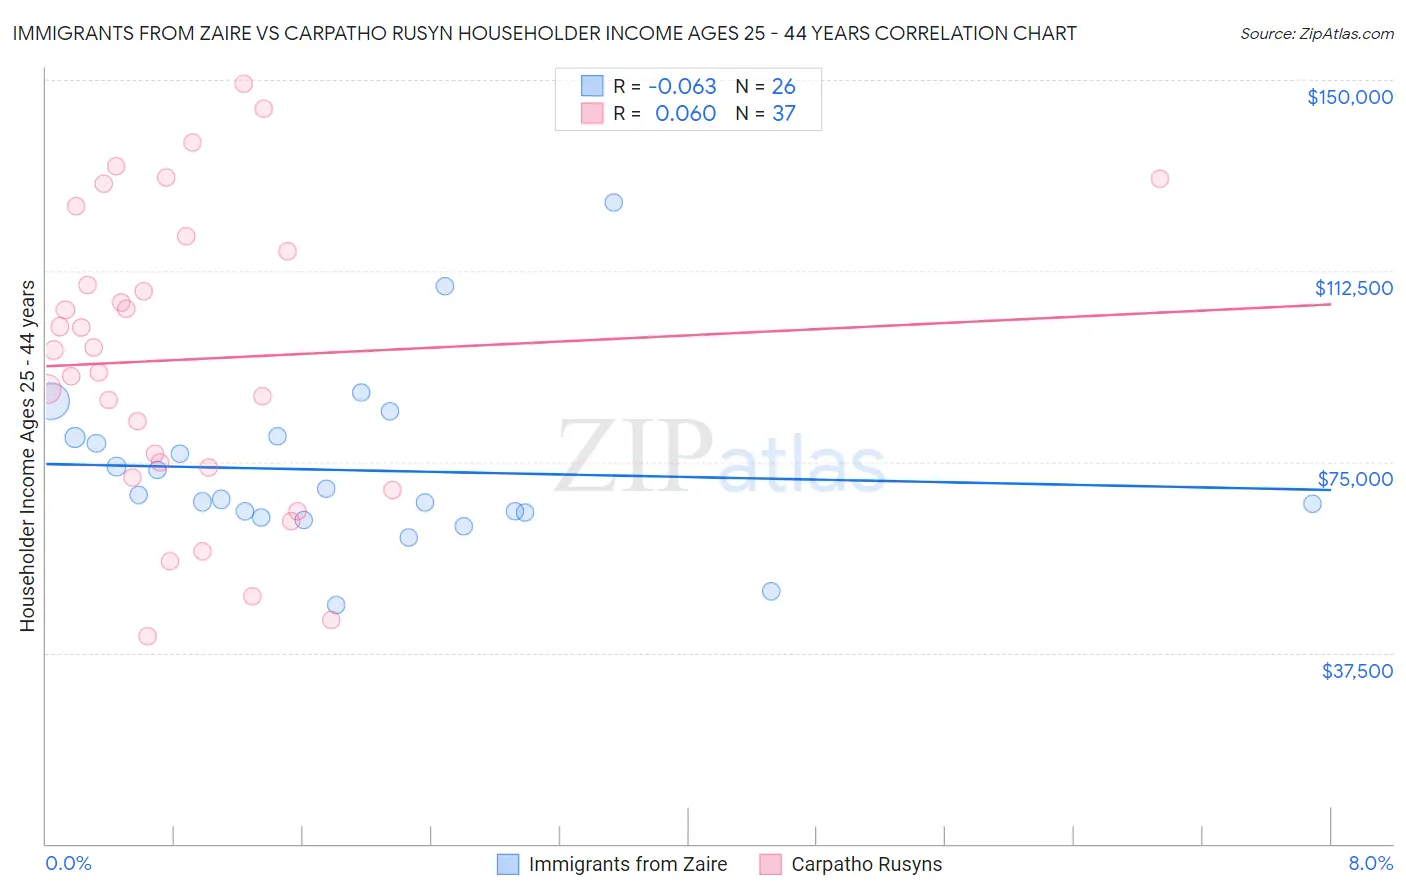 Immigrants from Zaire vs Carpatho Rusyn Householder Income Ages 25 - 44 years